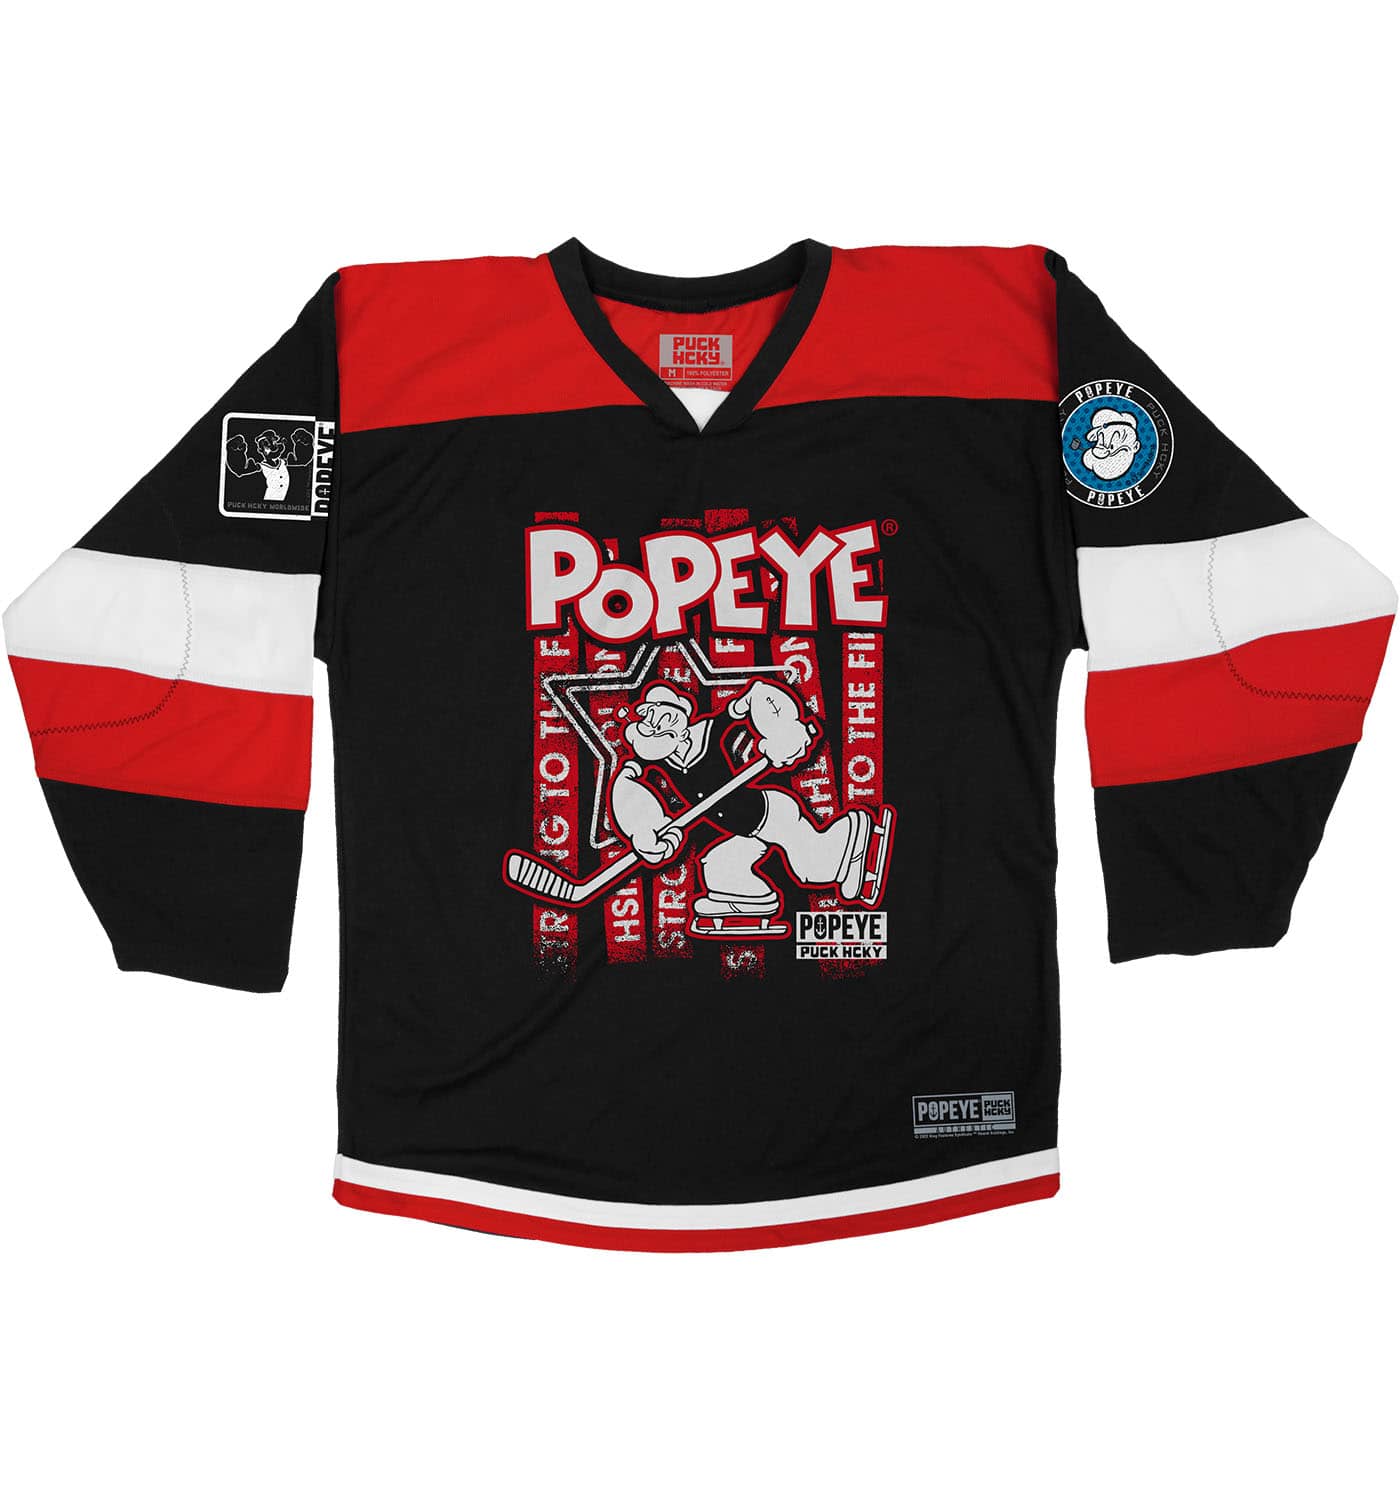 POPEYE 'STRONG TO THE FINISH' HOCKEY JERSEY – PUCK HCKY